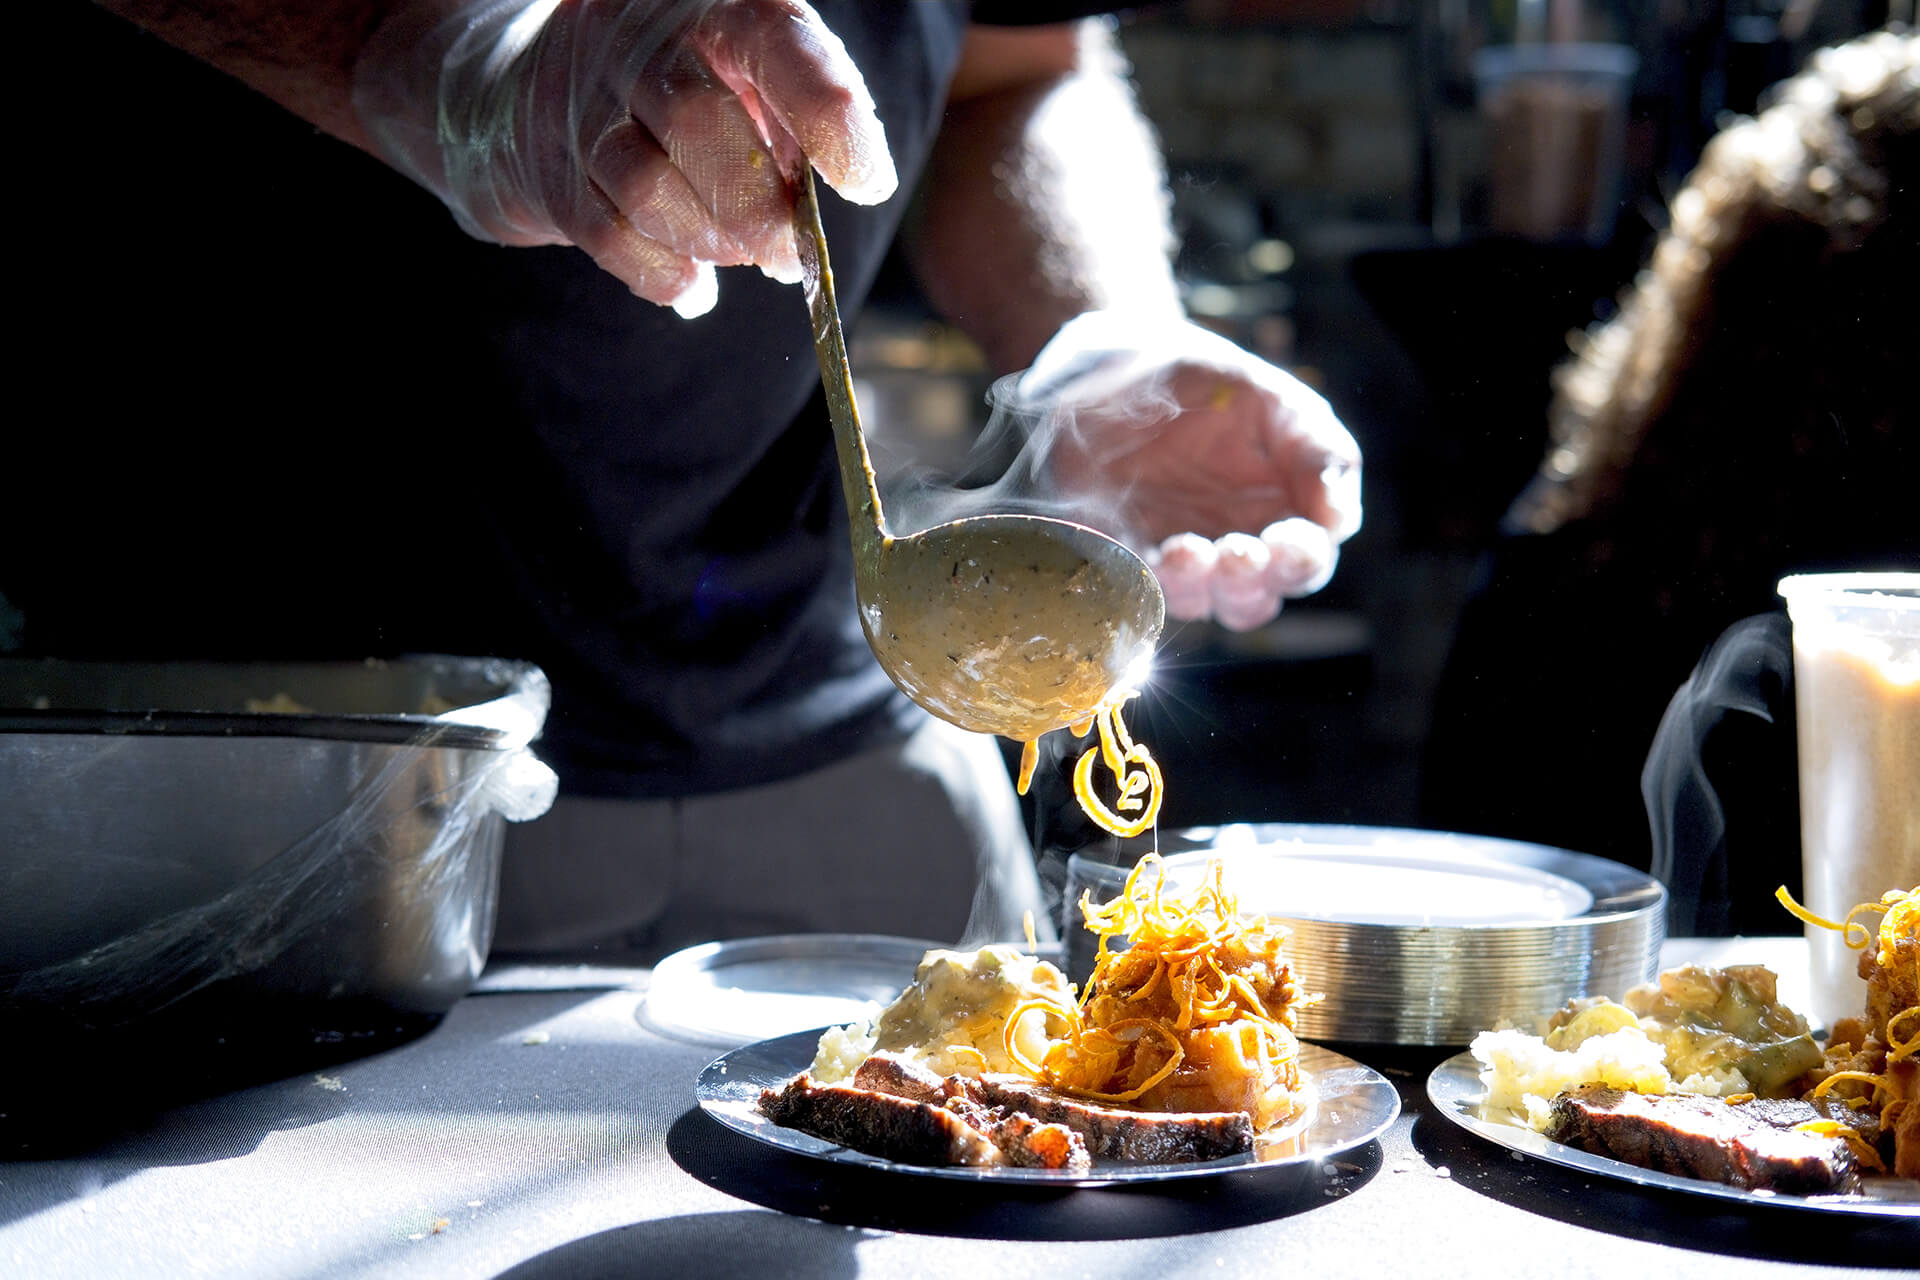 Cody Allen of Legends, Steakhouse in Murphy, NC, pours the finishing touches on a signature dish at the 2022 Forks and Corks event held June 2, at the historic Hackney Warehouse.